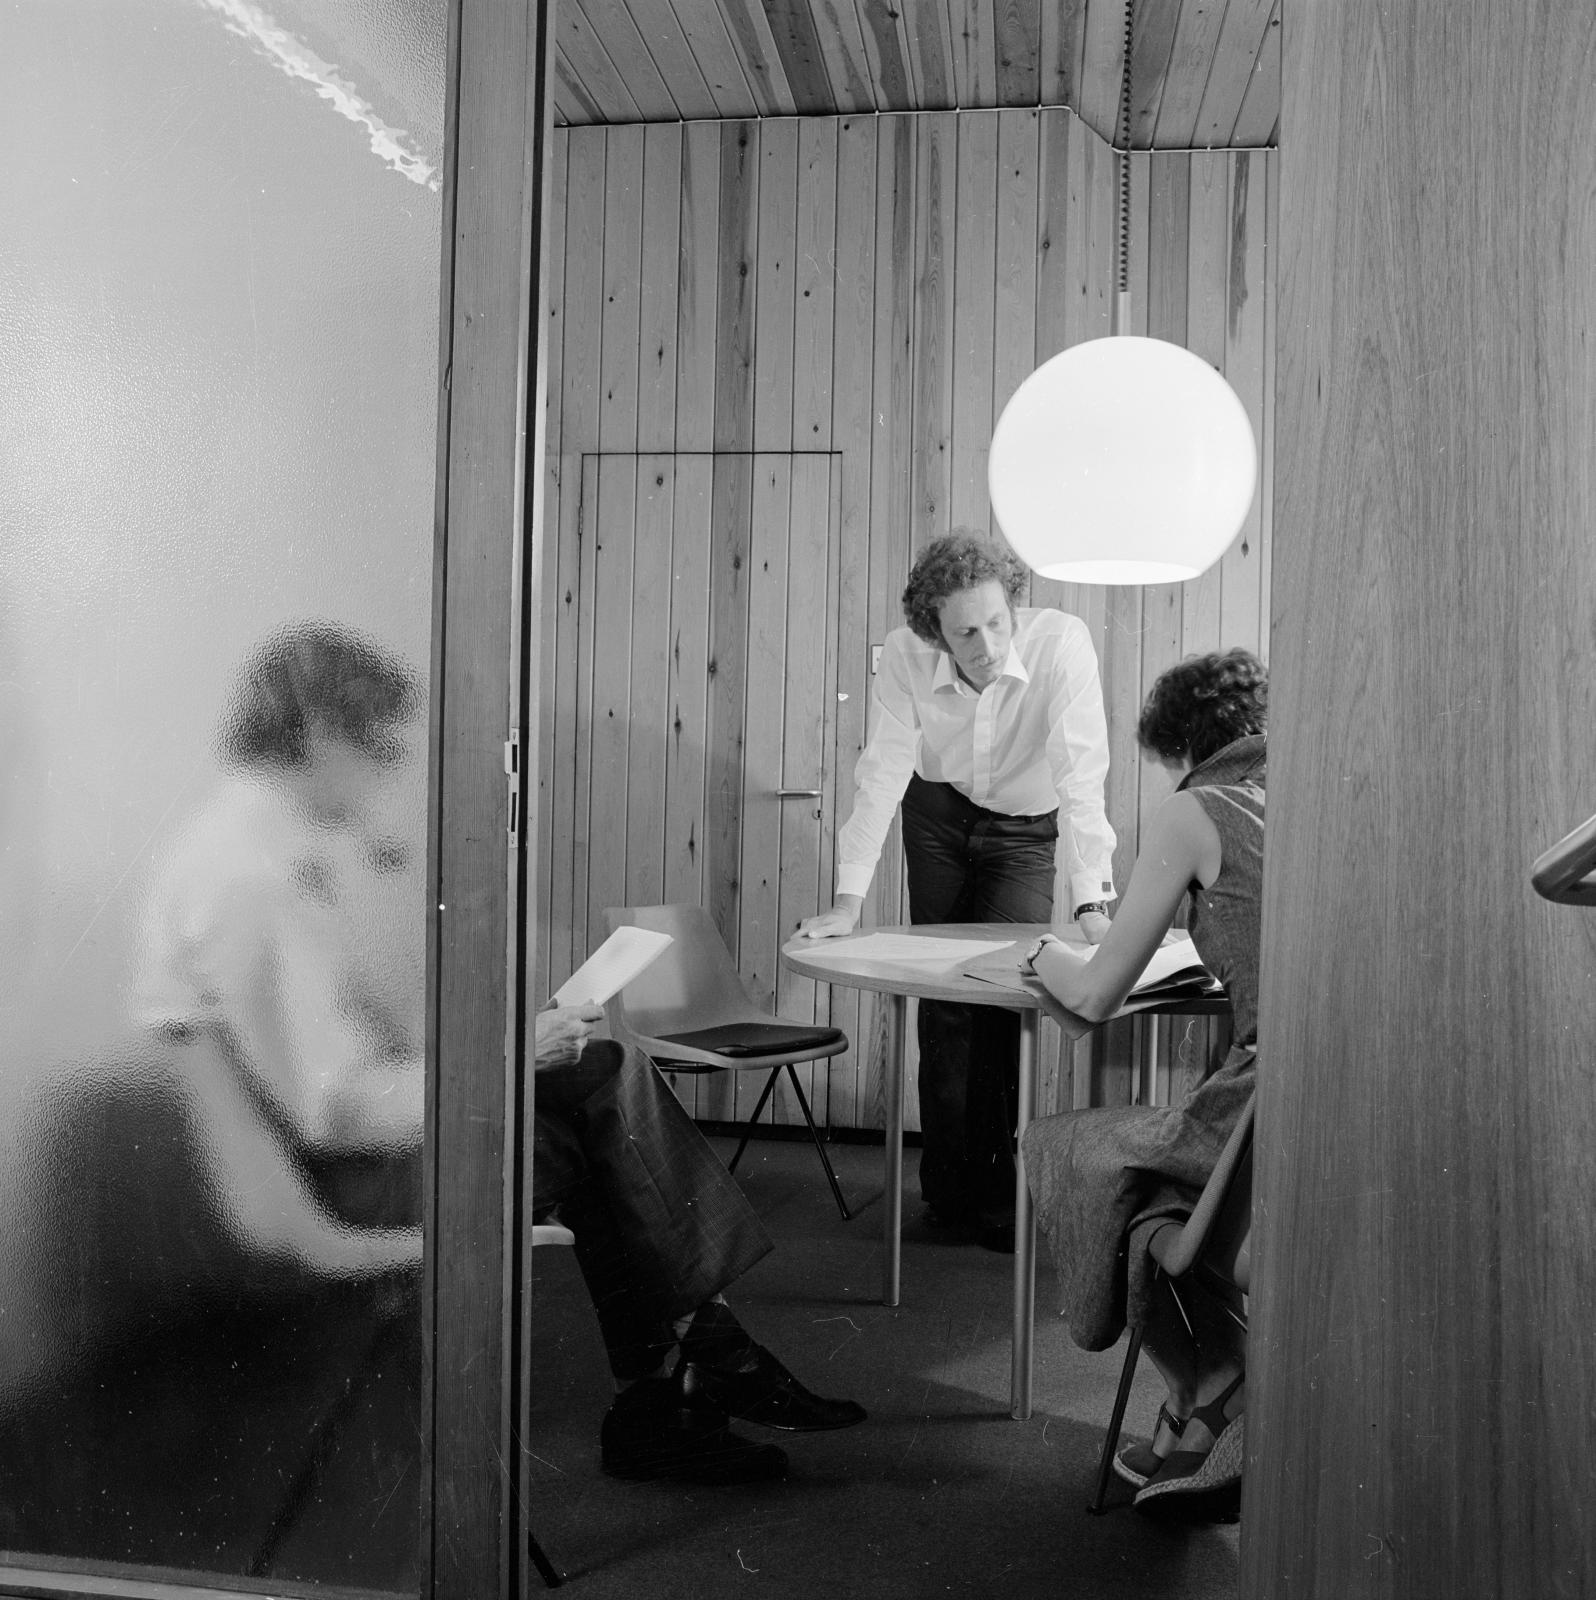 1975 office scene - black and white photo of three people around a meeting table in a timber clad room in the offices of the architects austin smith lord - as seen through a doorway.